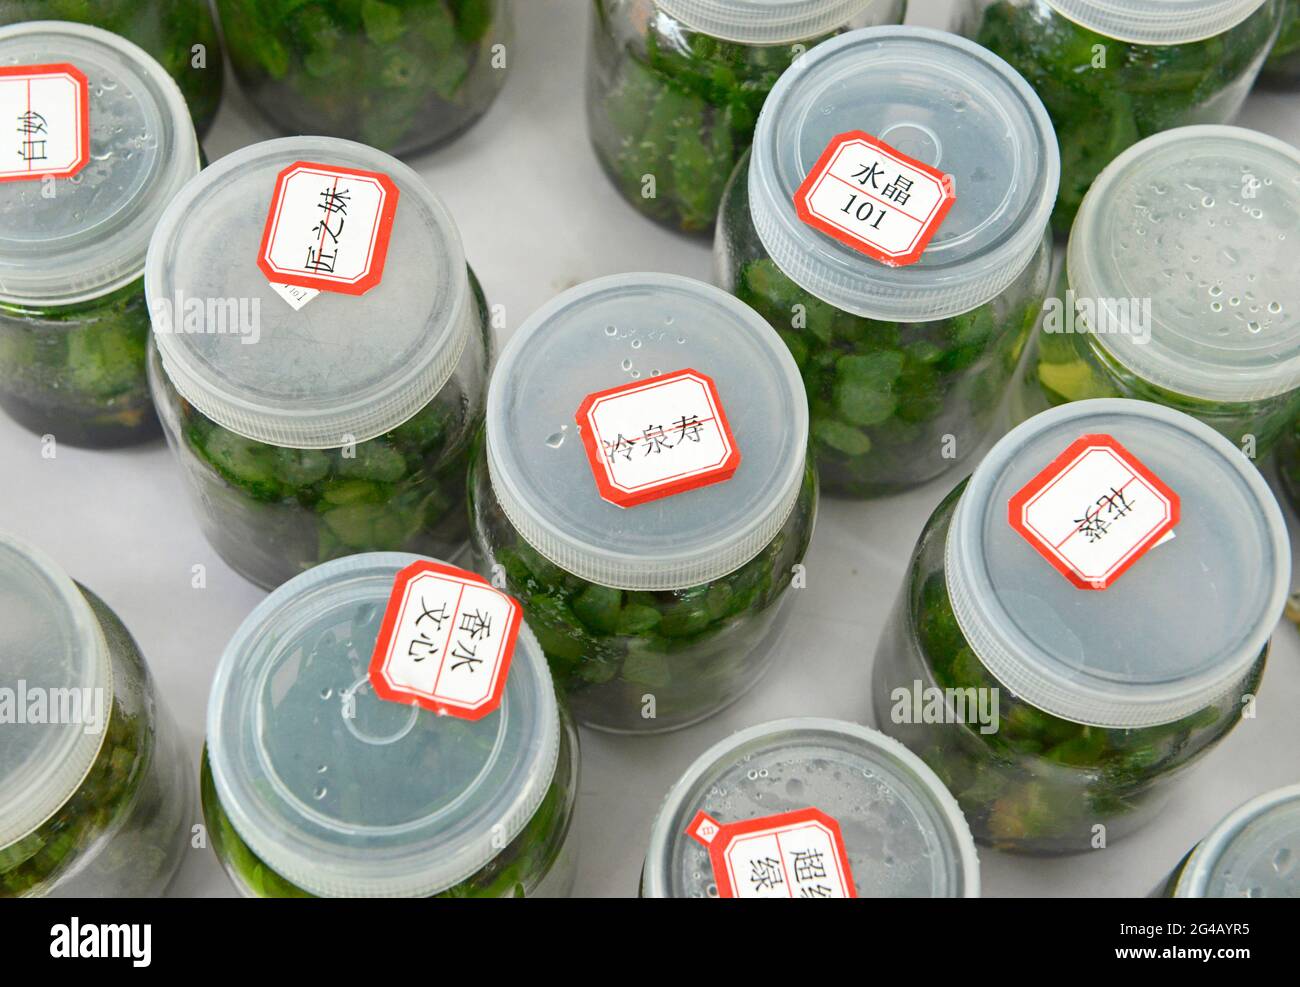 Bottles of micropropagated plants on show at a horticultural products exhibition and trade fair in Beijing, China Stock Photo